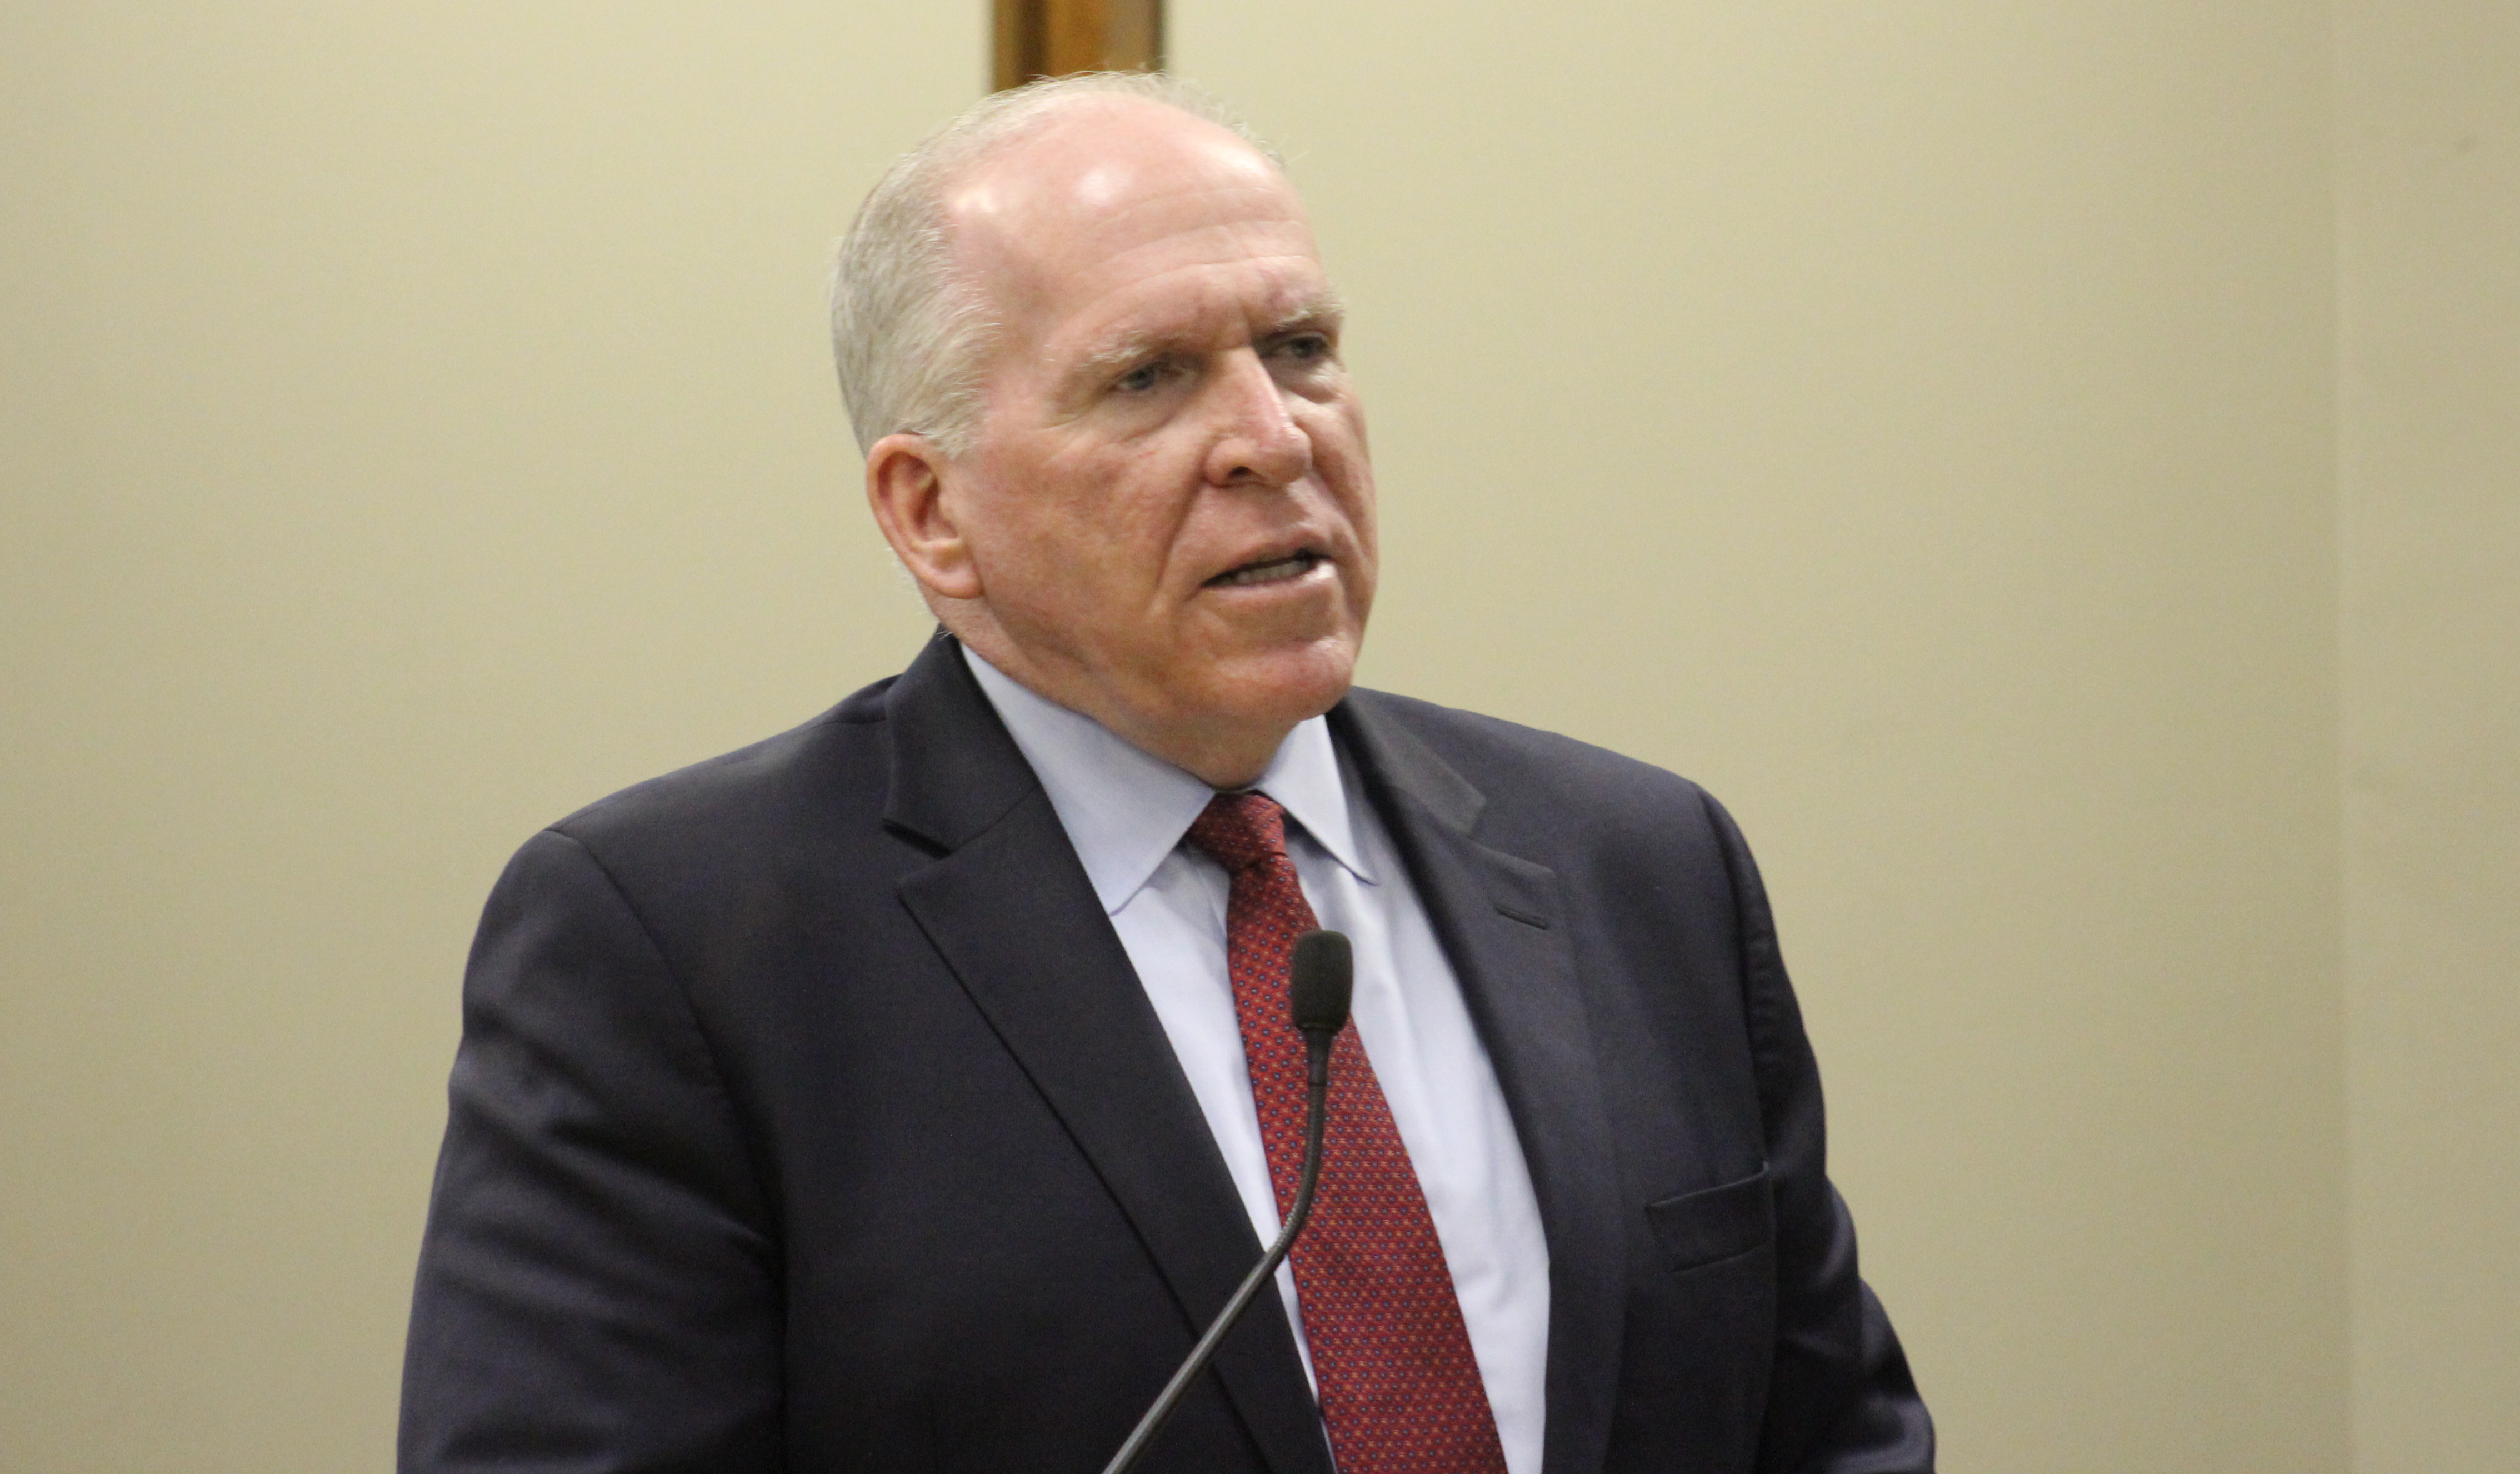 CIA director John Brennan answered questions from students of various Birmingham city high schools about the CIA. (Ariel Worthy, The Birmingham Times)